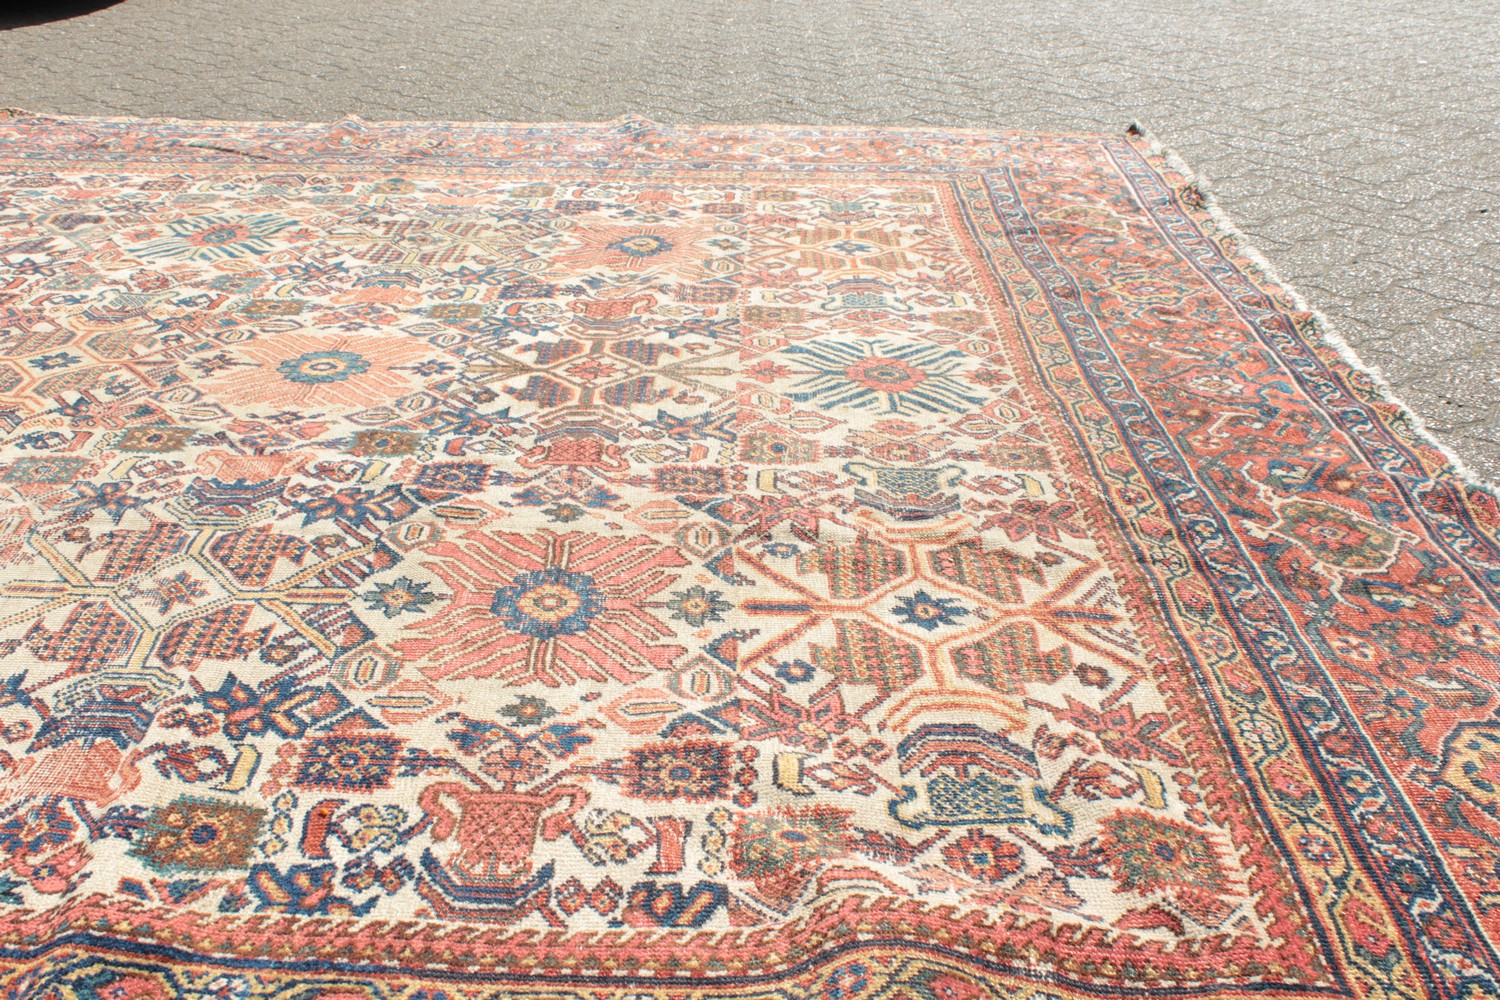 A VERY LARGE PERSIAN MAHAL CARPET. 15ft x 10ft 6ins. - Image 11 of 17